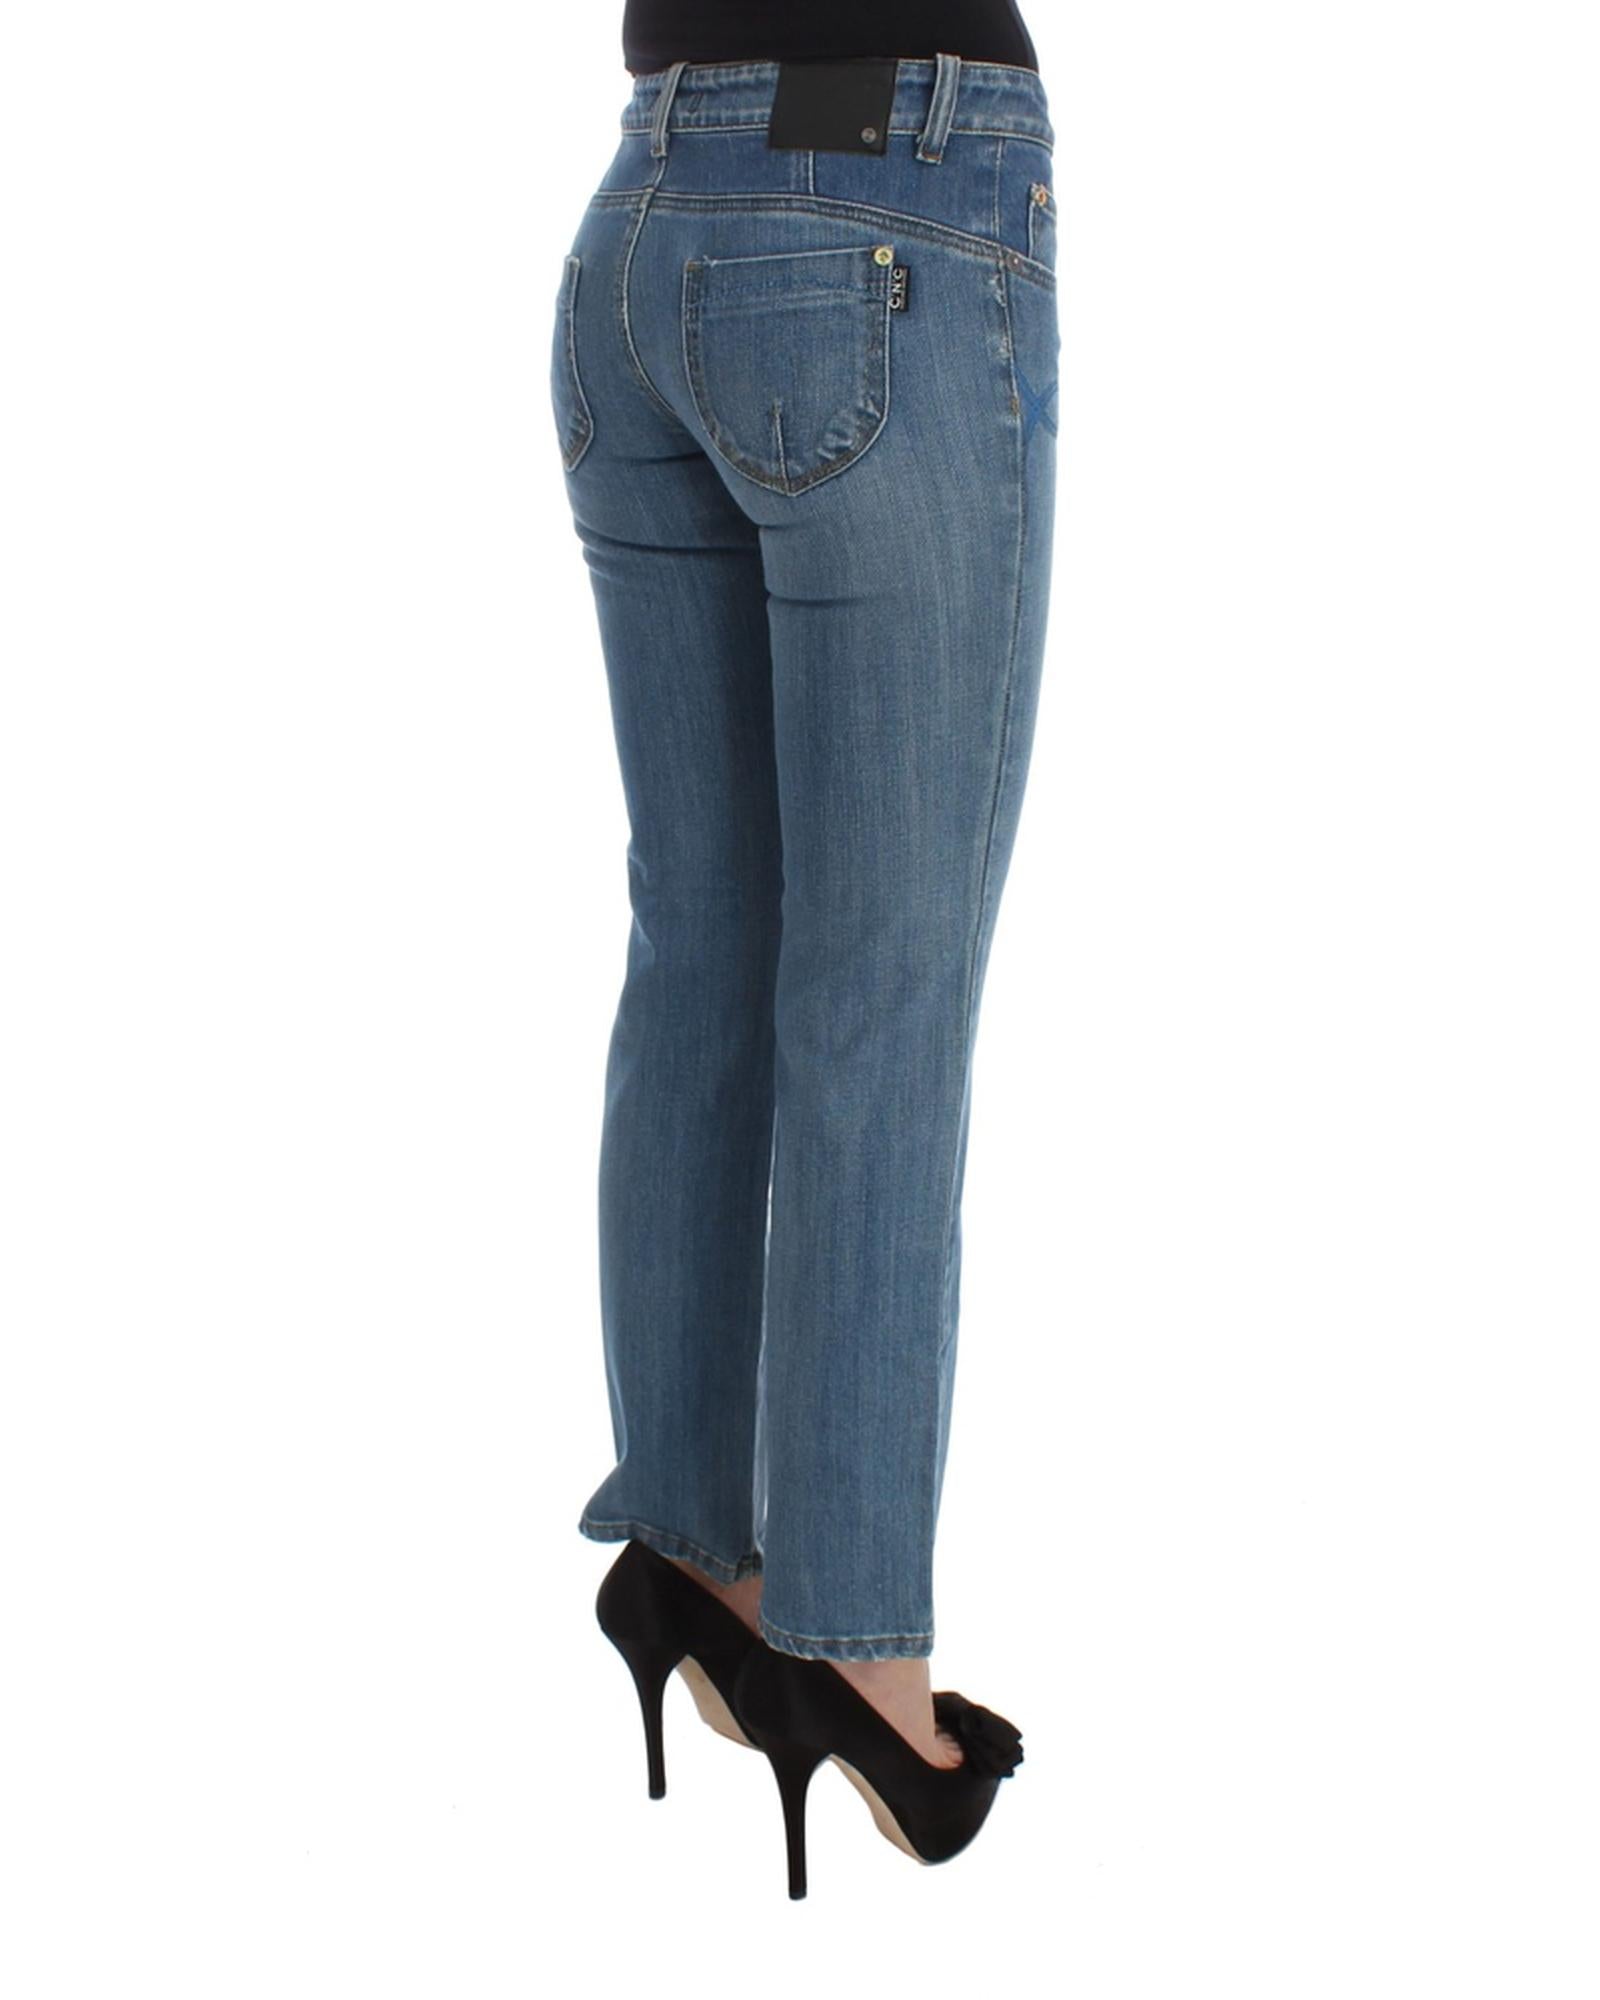 Copy of CoSTUME NATIONAL CNC Slim Fit Jeans W26 US Women